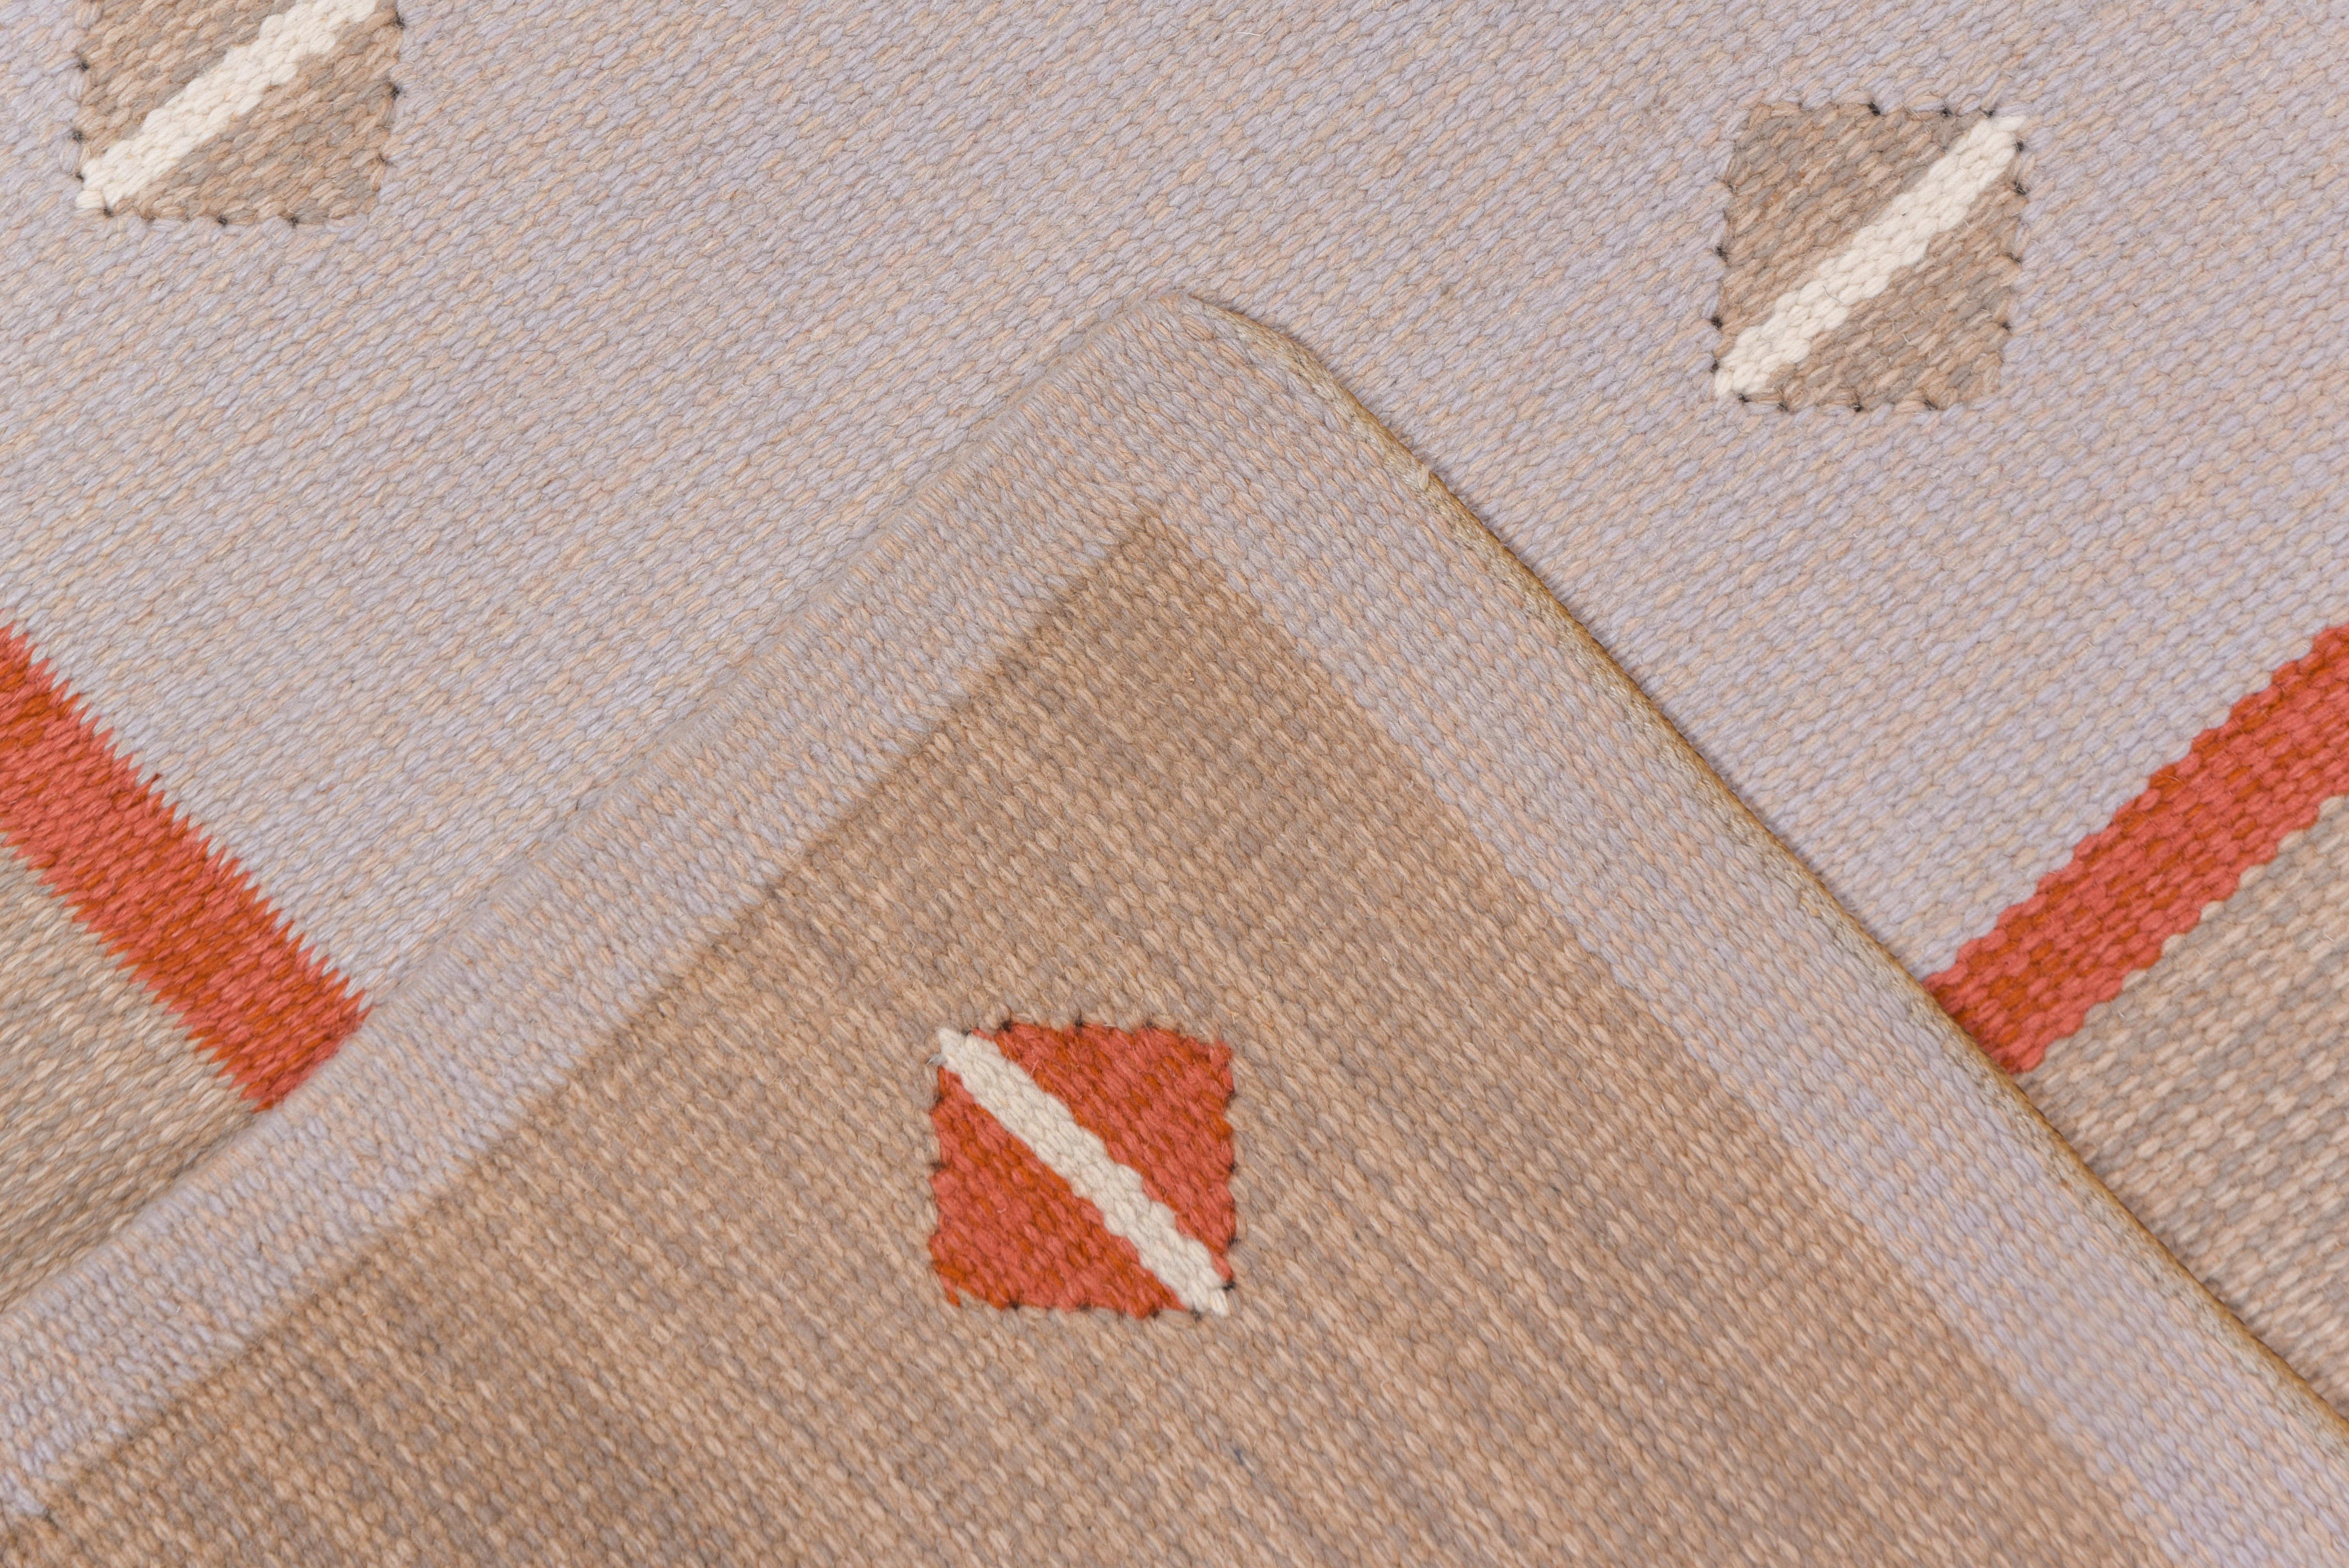 This Scandinavian flatweave shows a similar field and border pattern of small, paired, back-to-back triangles in light brown and rust respectively, on pink grounds. Shared warp tapestry weave, wool pattern wefts. As new condition. Minimalist design.